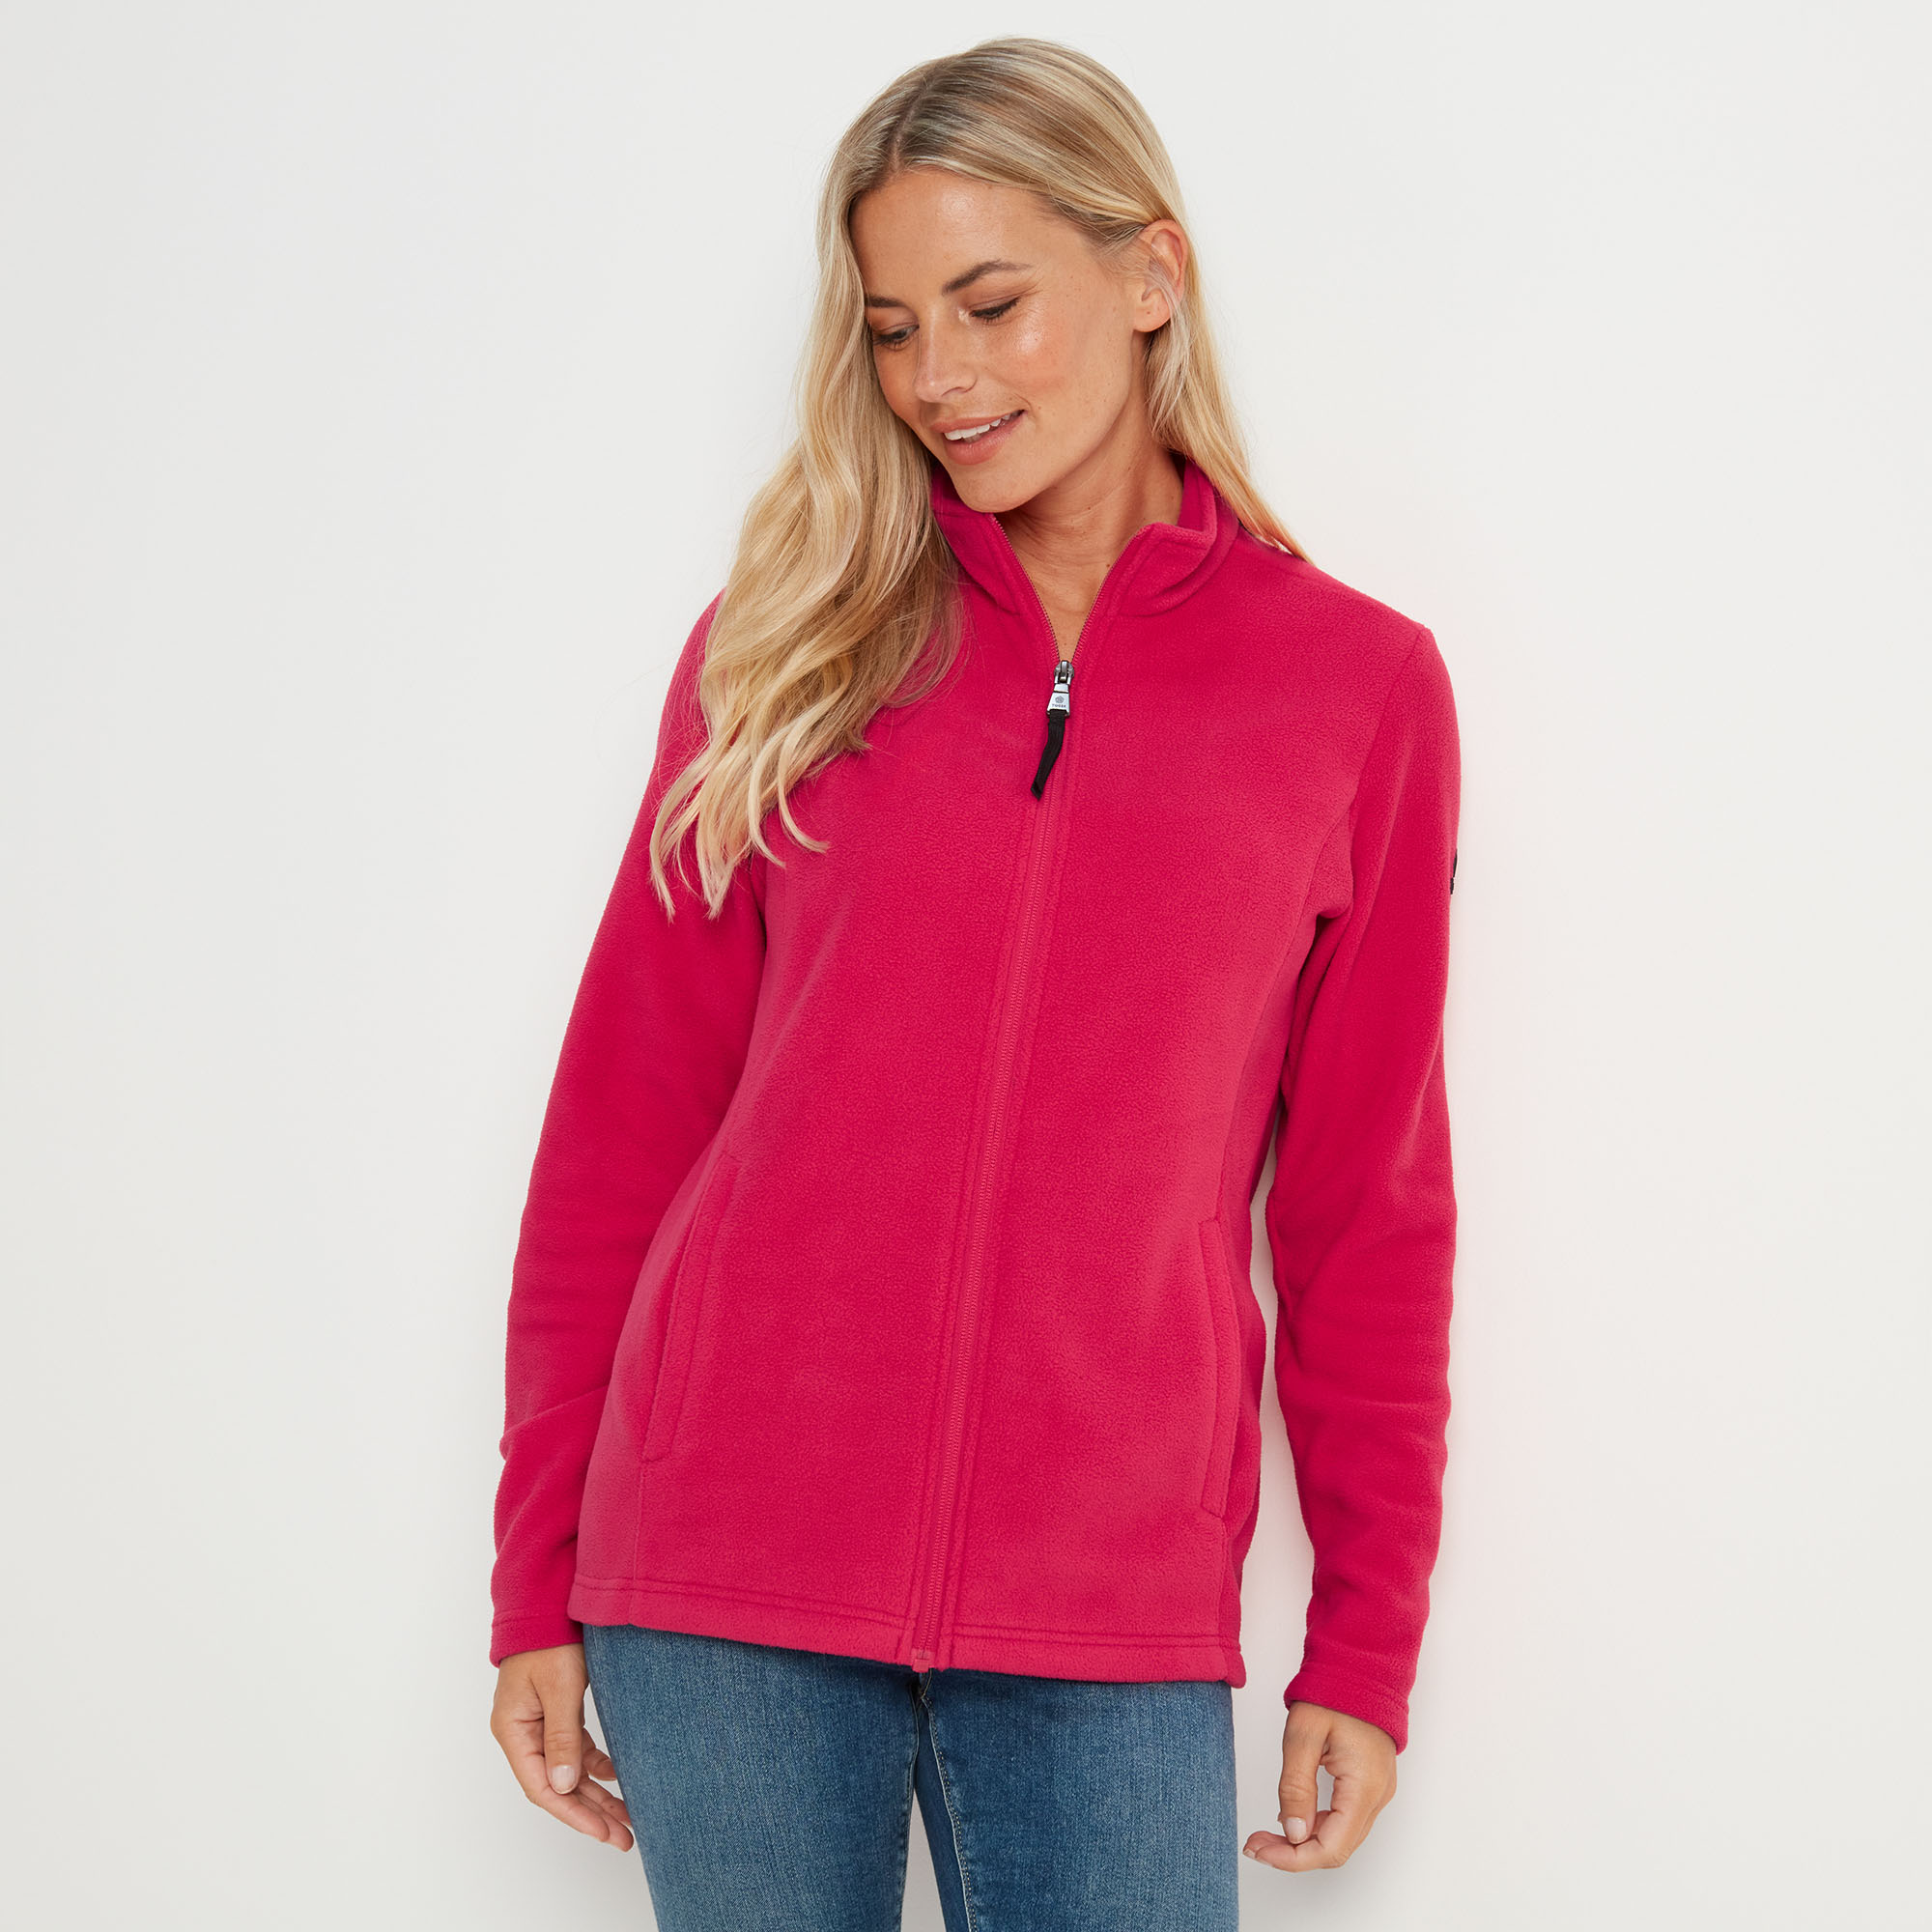 TOG24 Revive Womens Fleece Jacket 100% Recycled Polyester With Full Zip ...